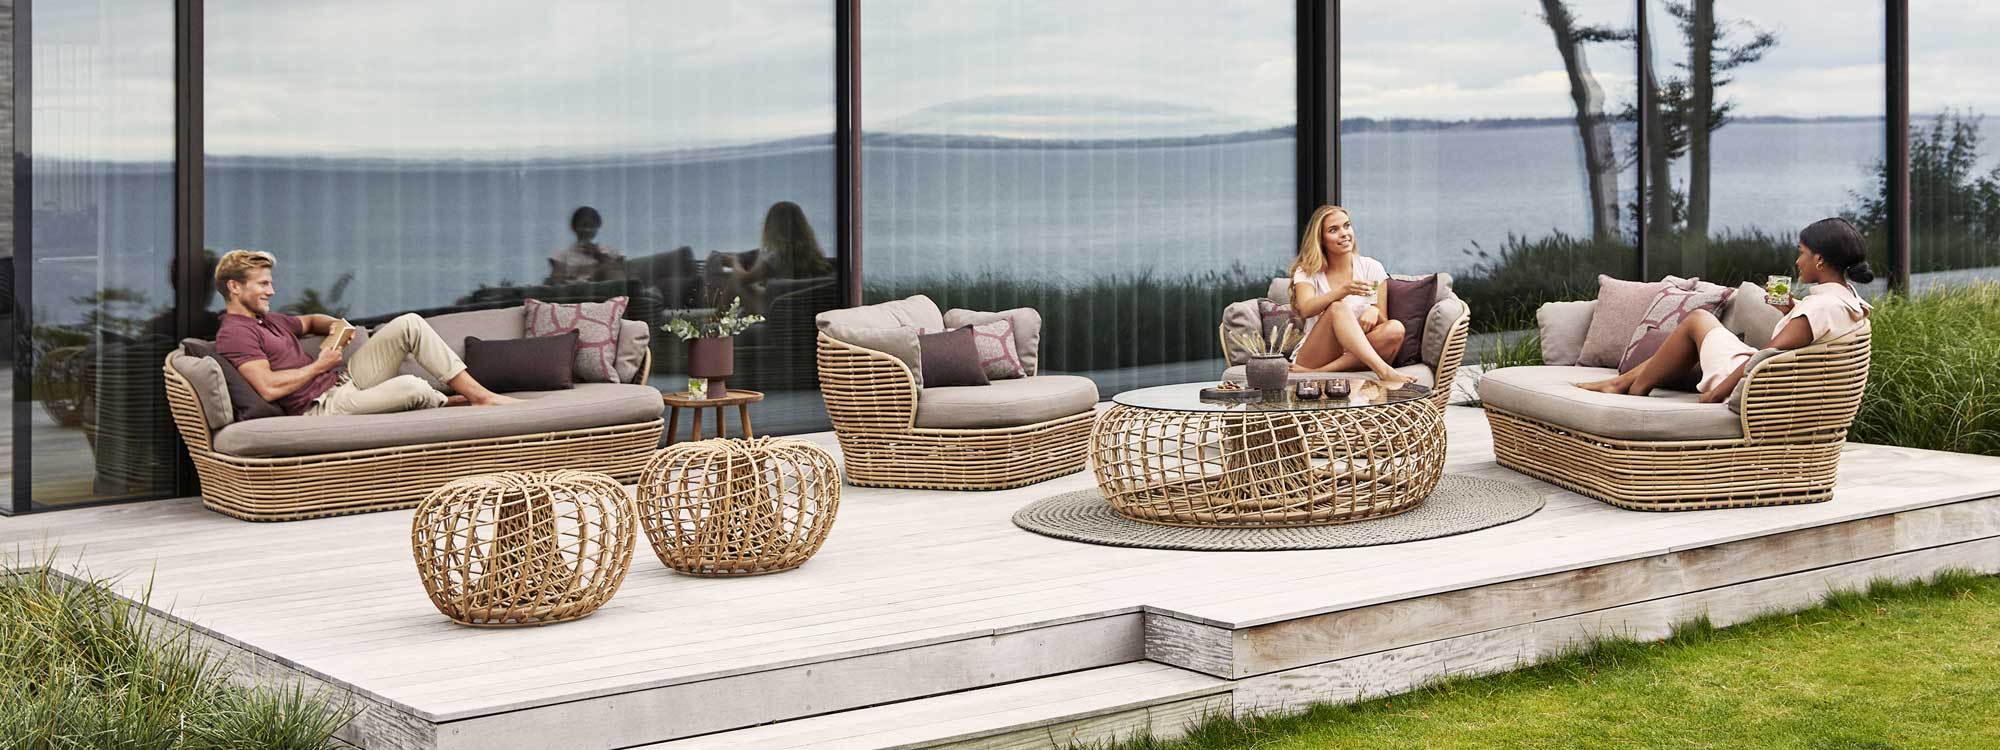 Image of man and 2 women relaxing on Cane-line Basket cane garden sofas on decking, with Nest cane garden tables in the centre